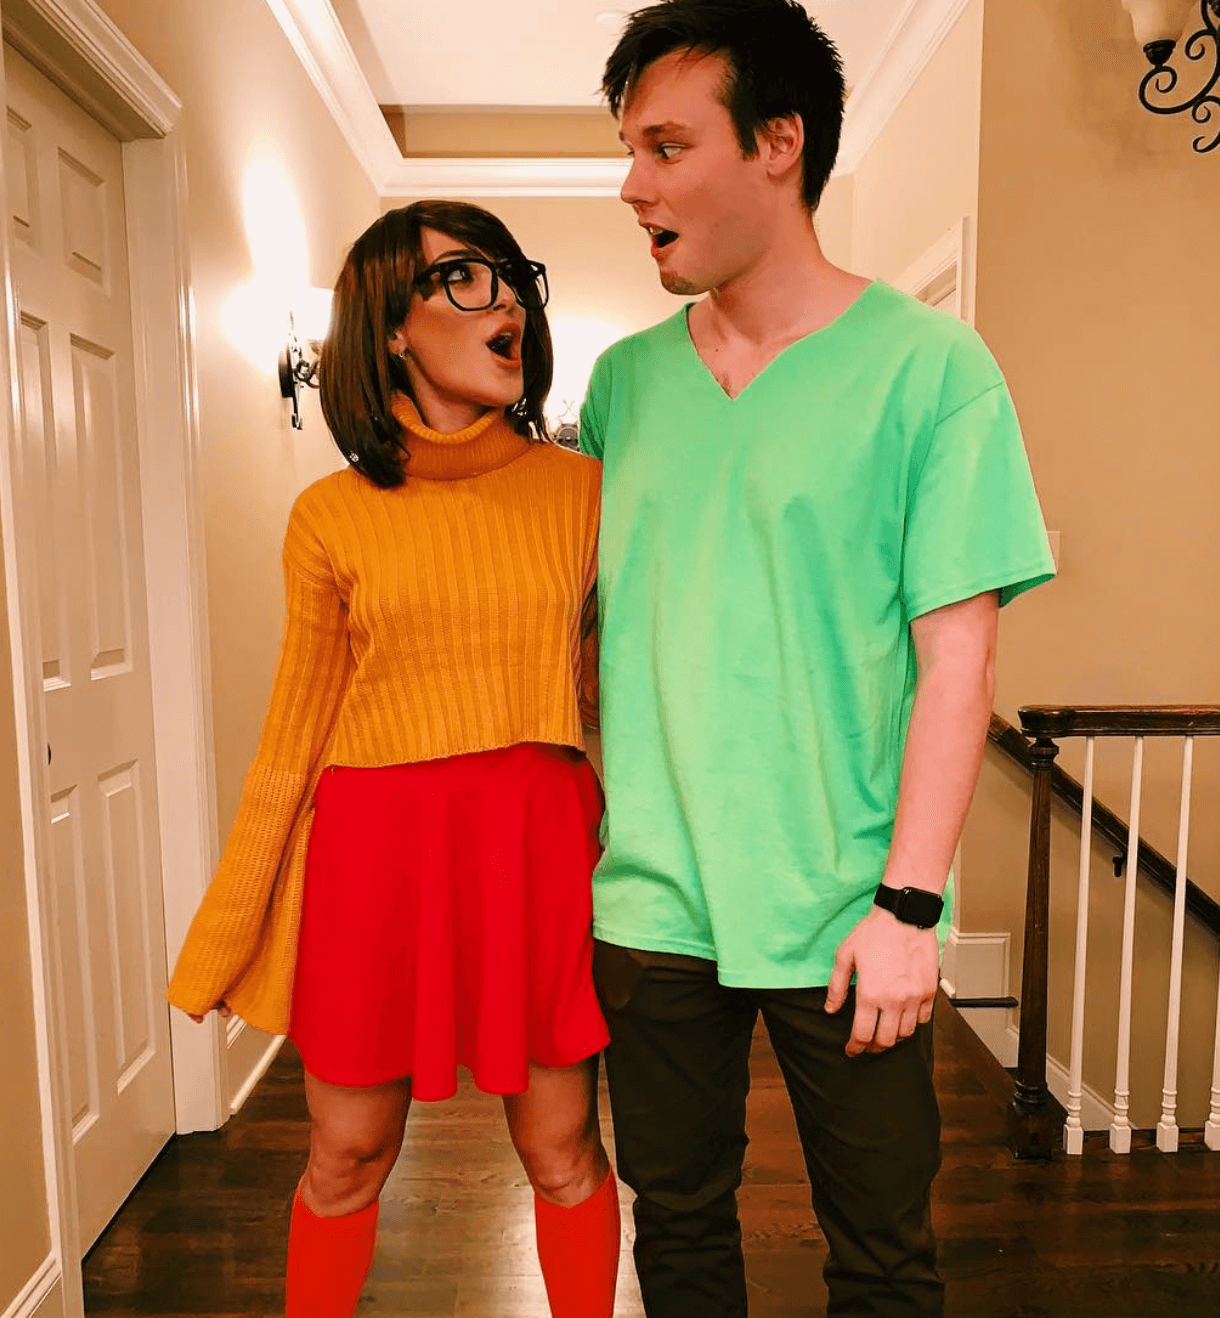 16 Funny Couples Halloween Costume Ideas Perfect For Last Minute Parties 0450